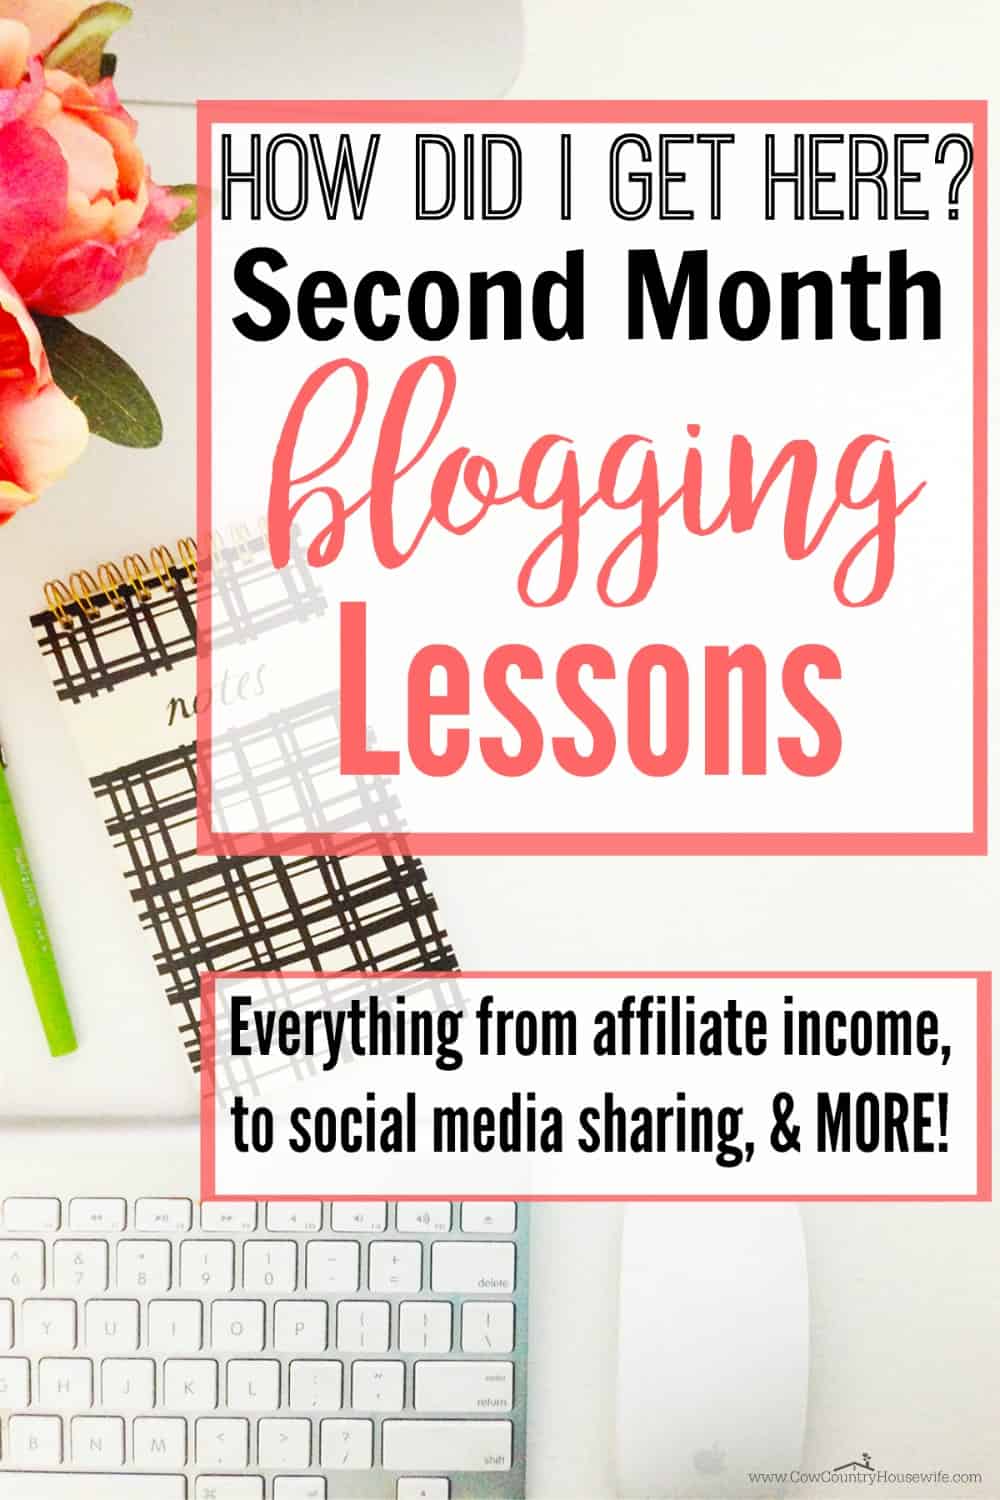 If you want to make an income from your blog, you need to check this out!! She shares her second month blogging lessons, including affiliate income and her social media schedule. Plus, a few tips I'm glad I know! I don't want Facebook to get grumpy with me!!